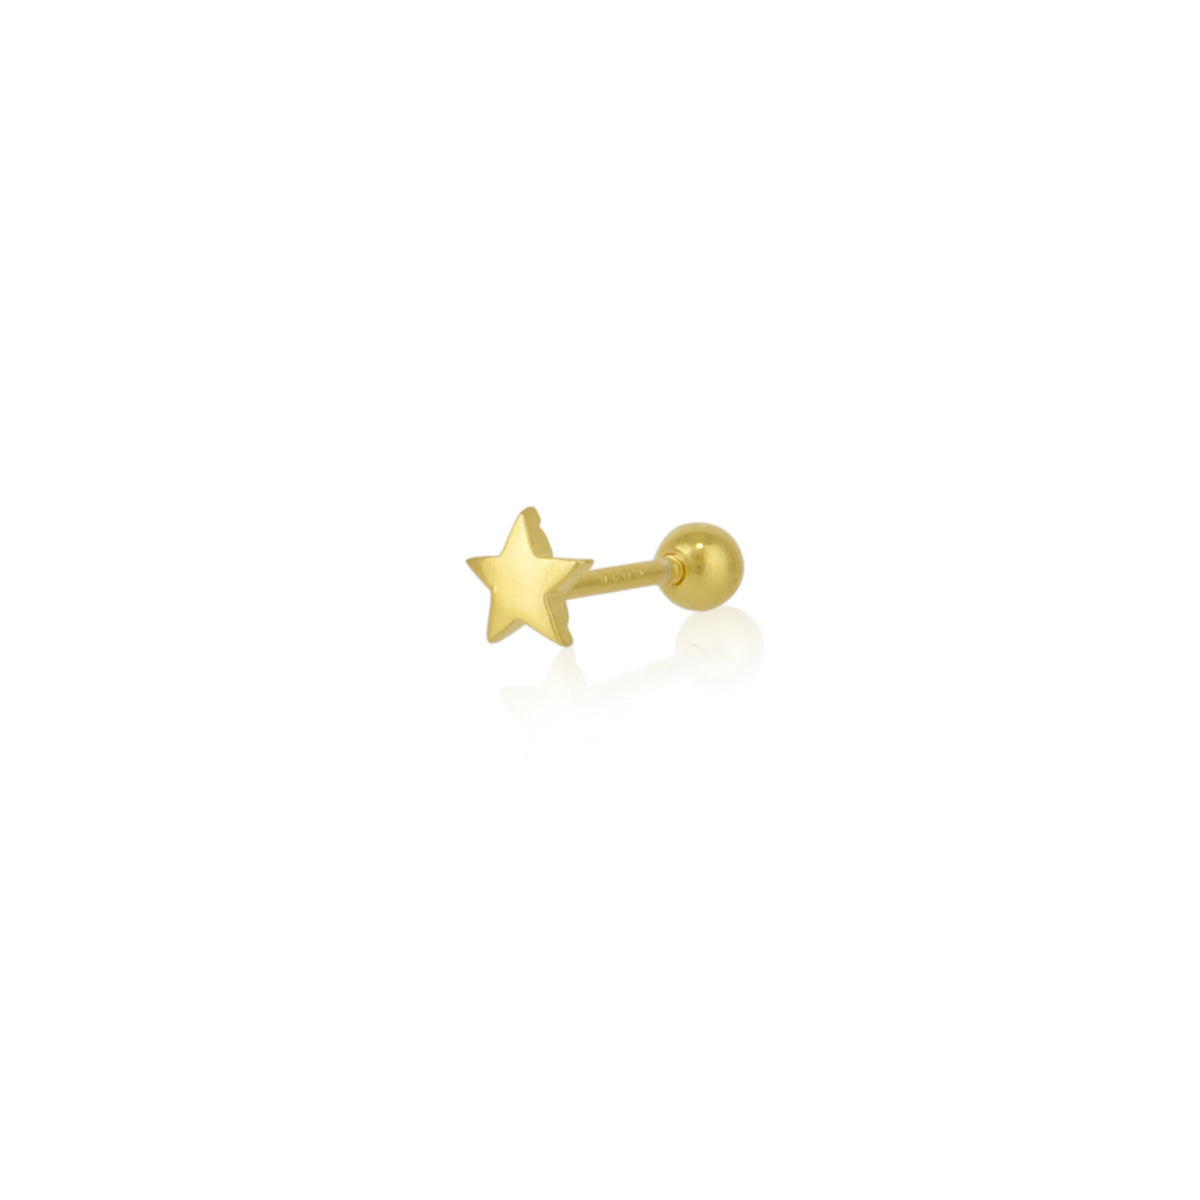 Star Piercing With Ball End Sterling Silver